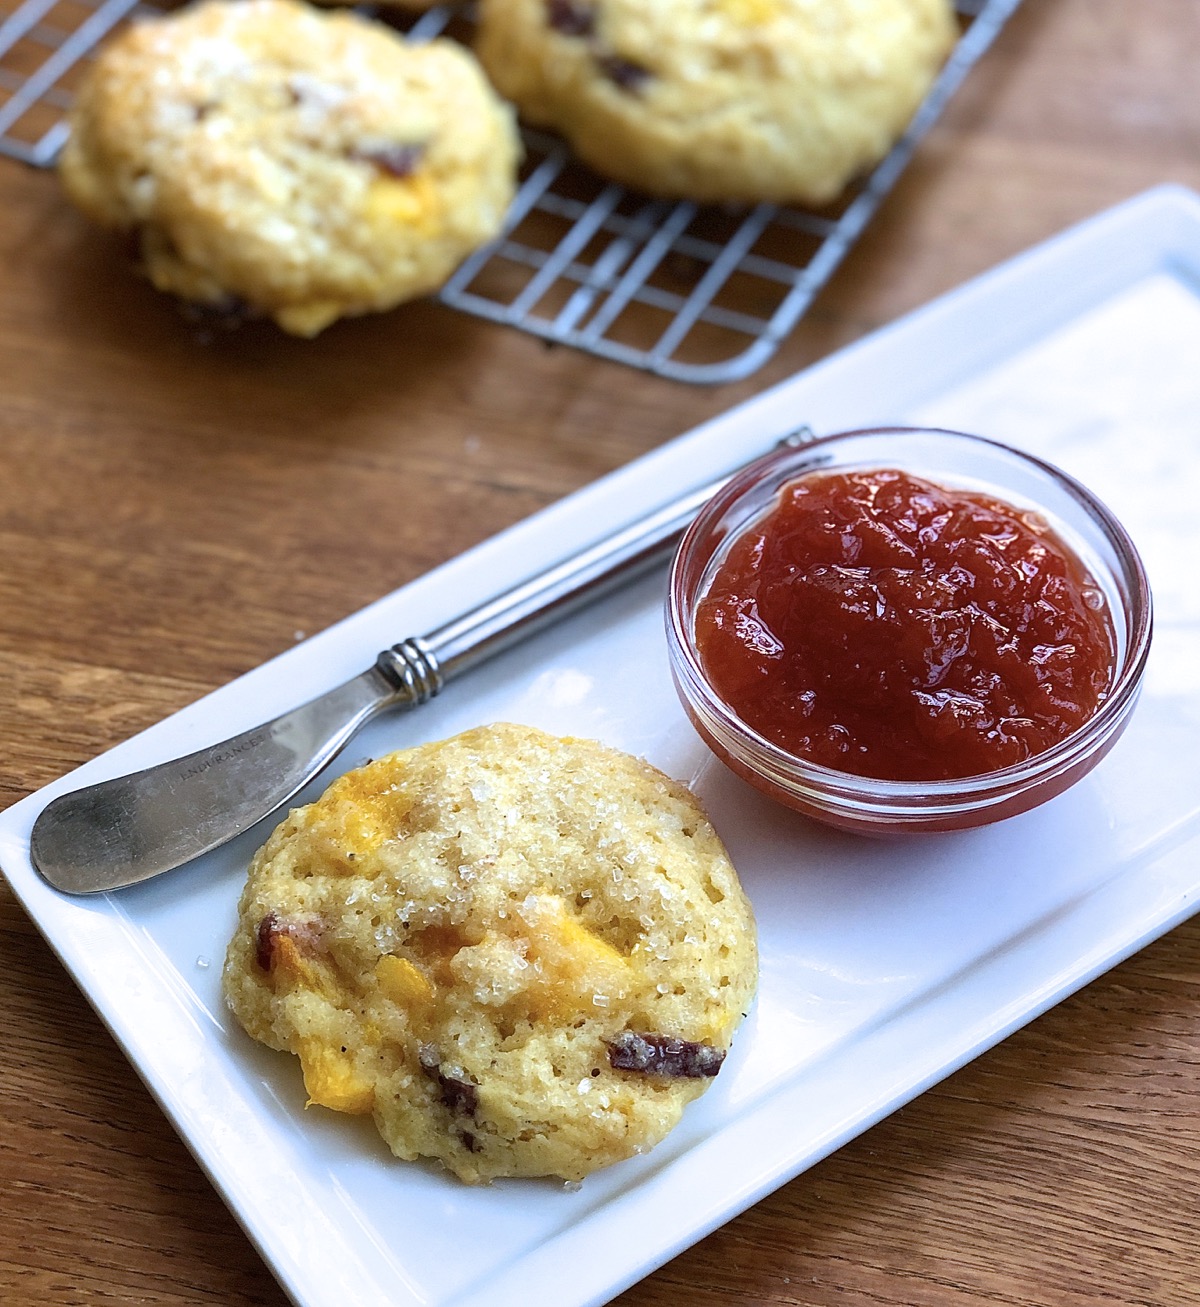 A peach scone on a plate with a butter knife and bowl of peach preserves, ready to enjoy.